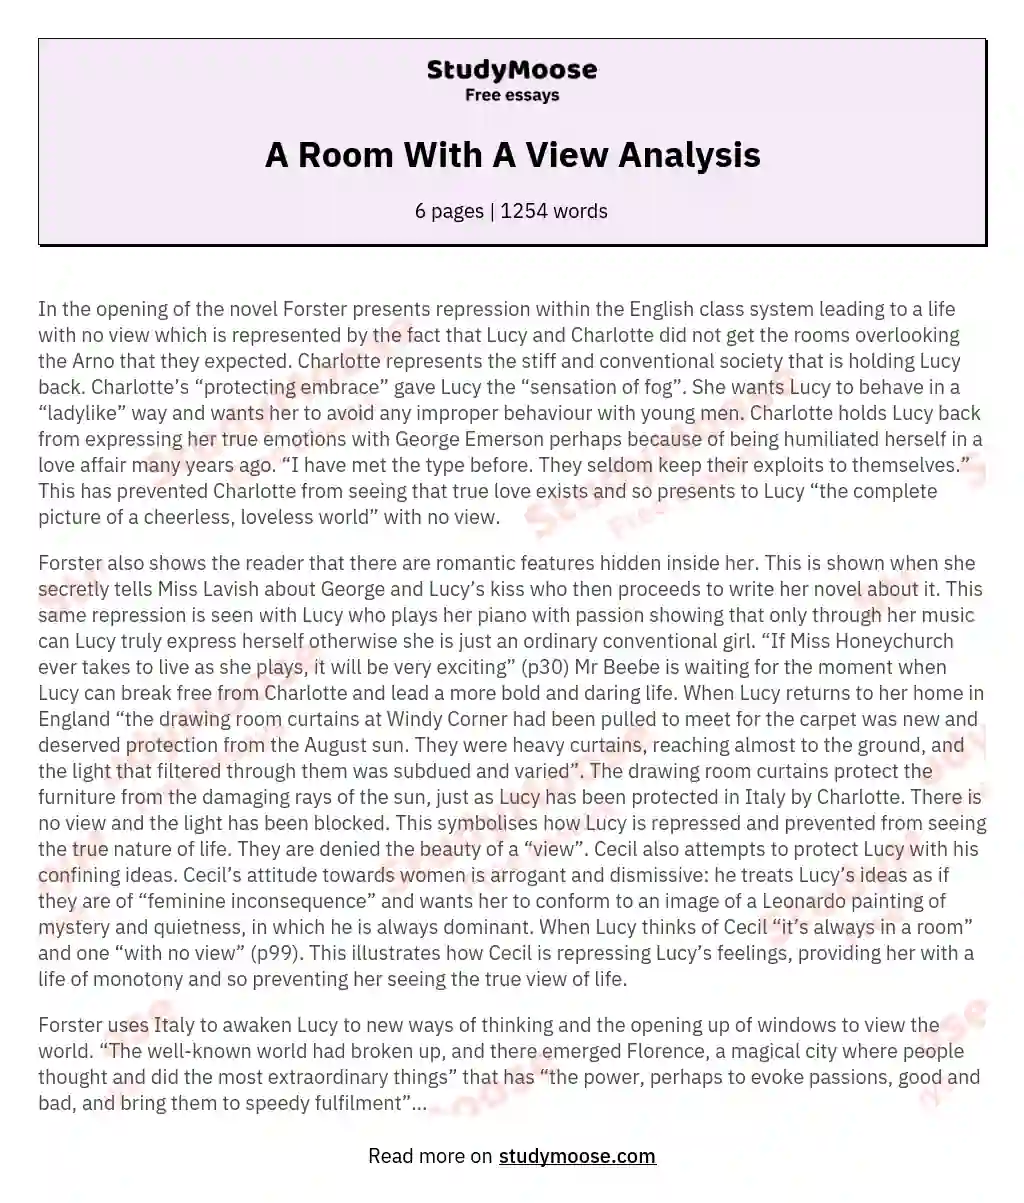 A Room With A View Analysis essay